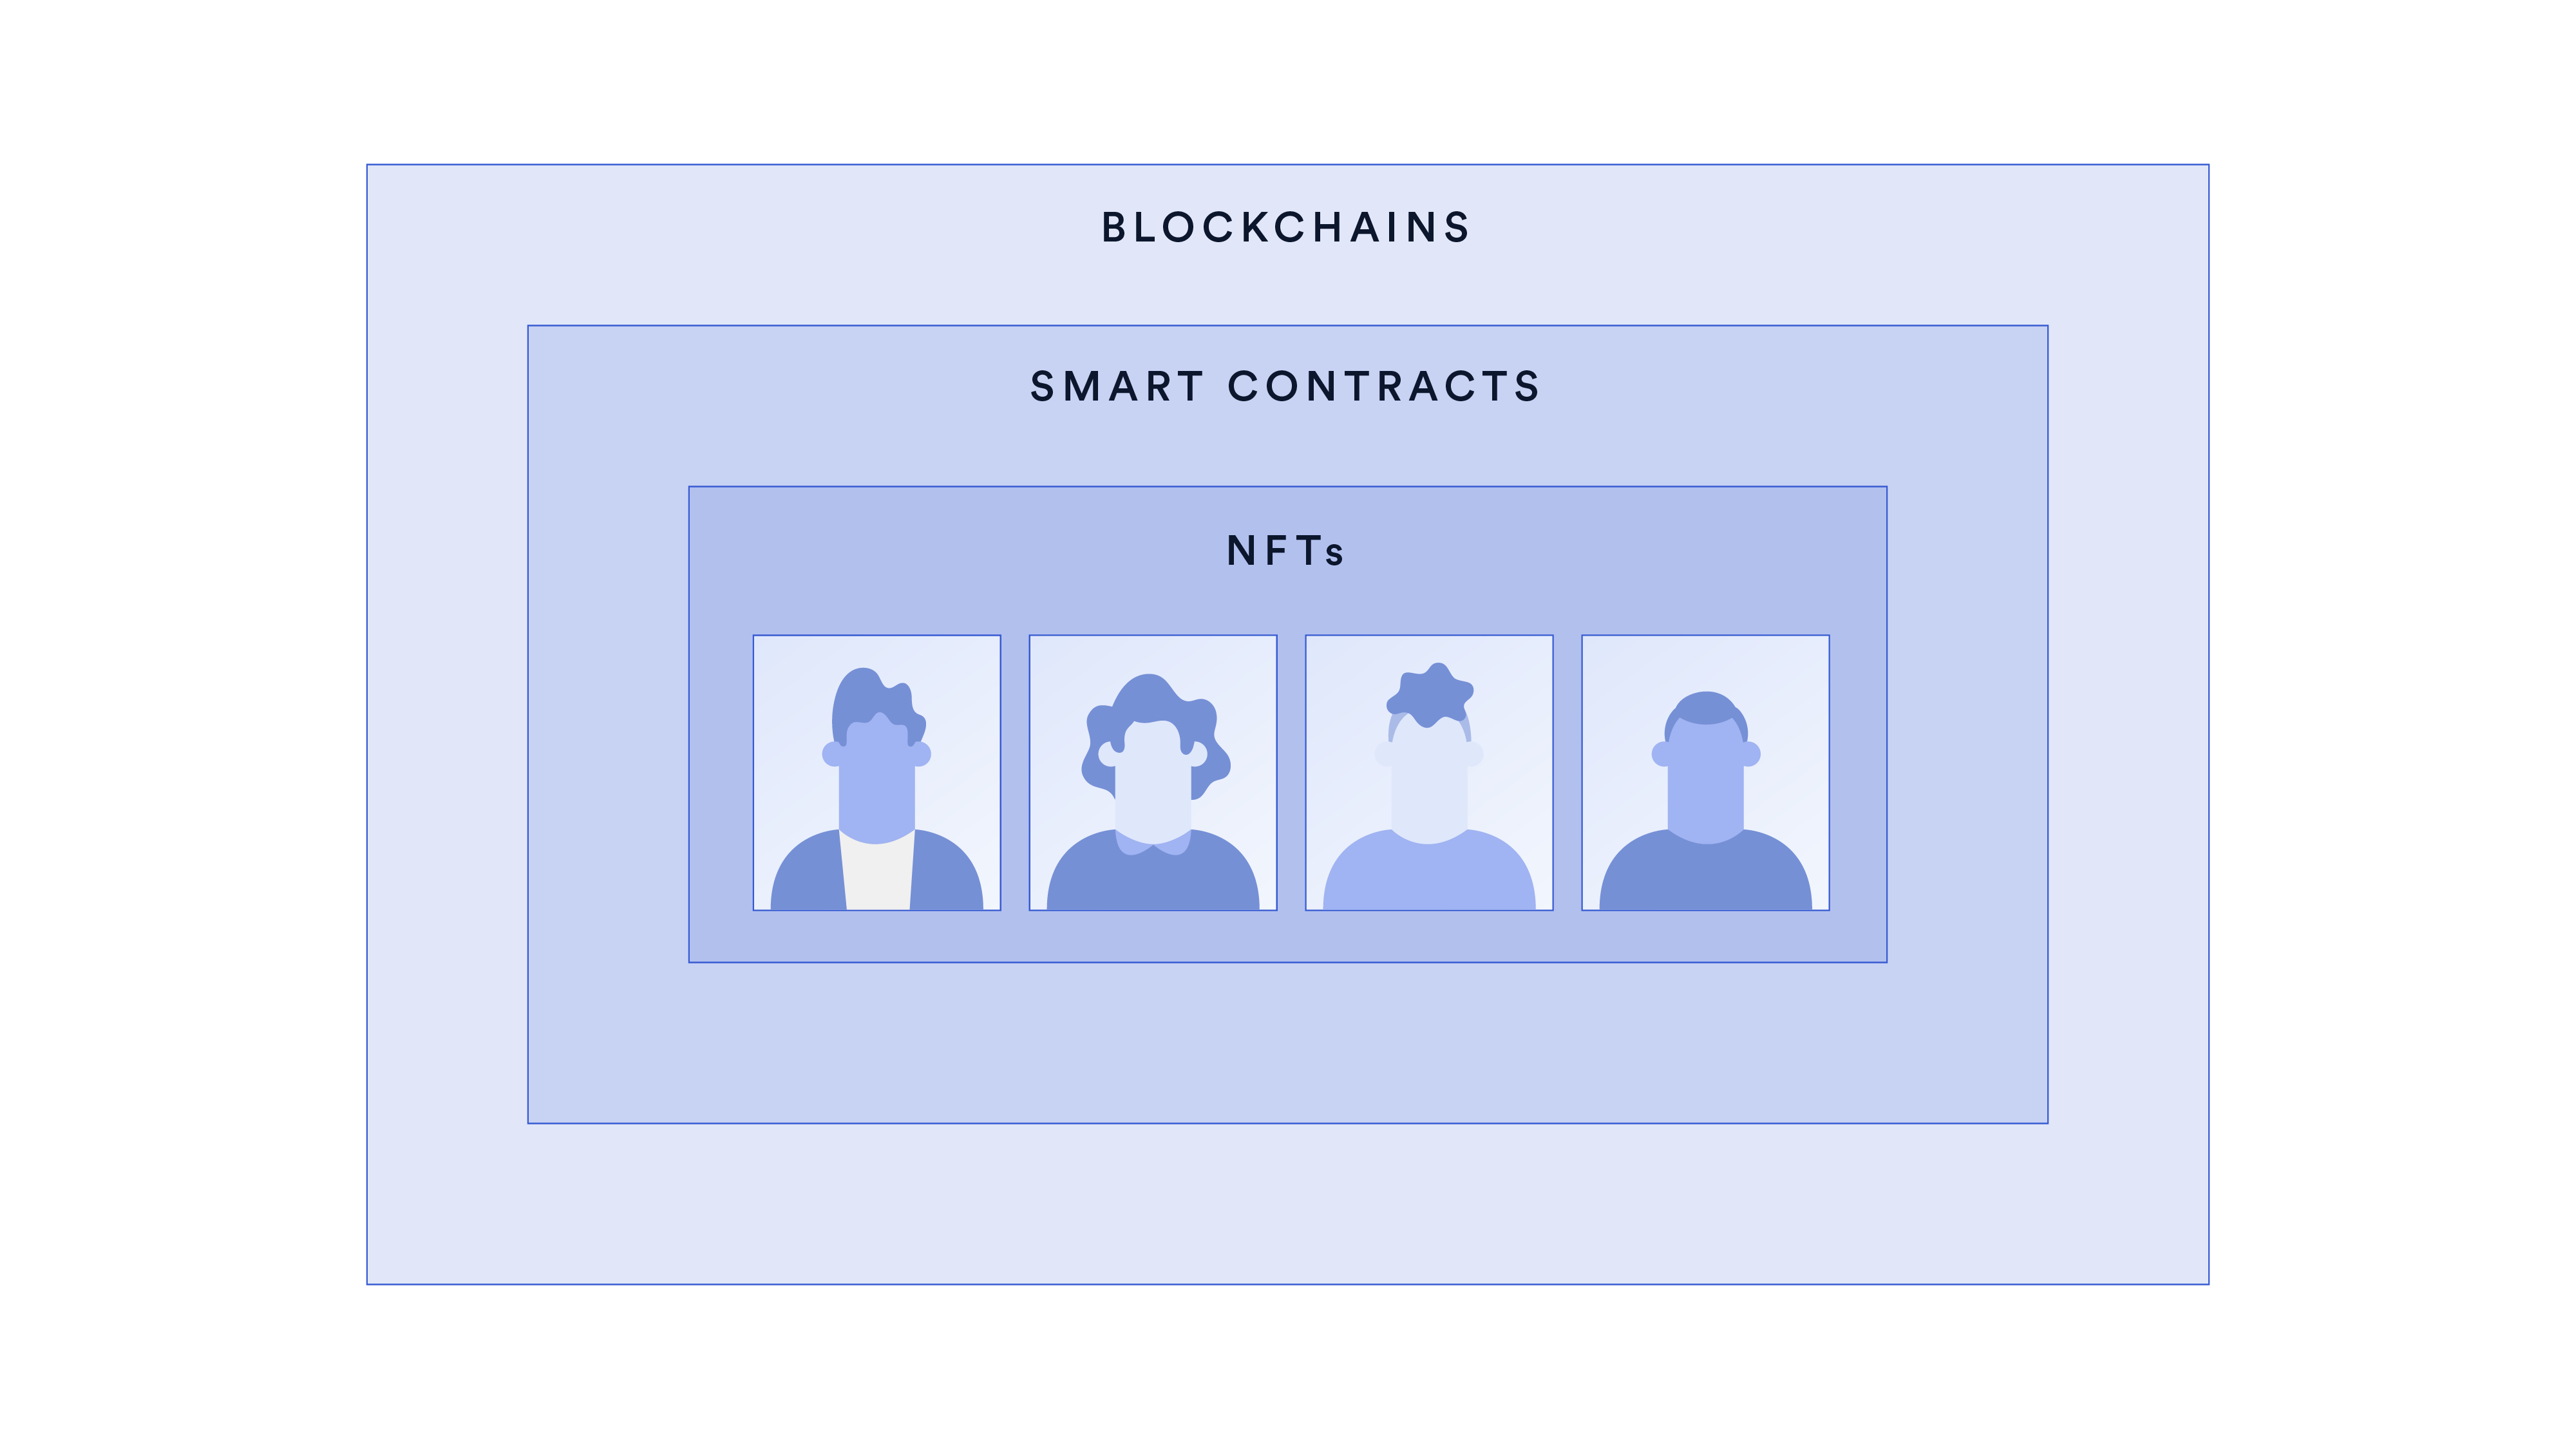 A diagram showing the hierarchical structure from NFT to blockchain.